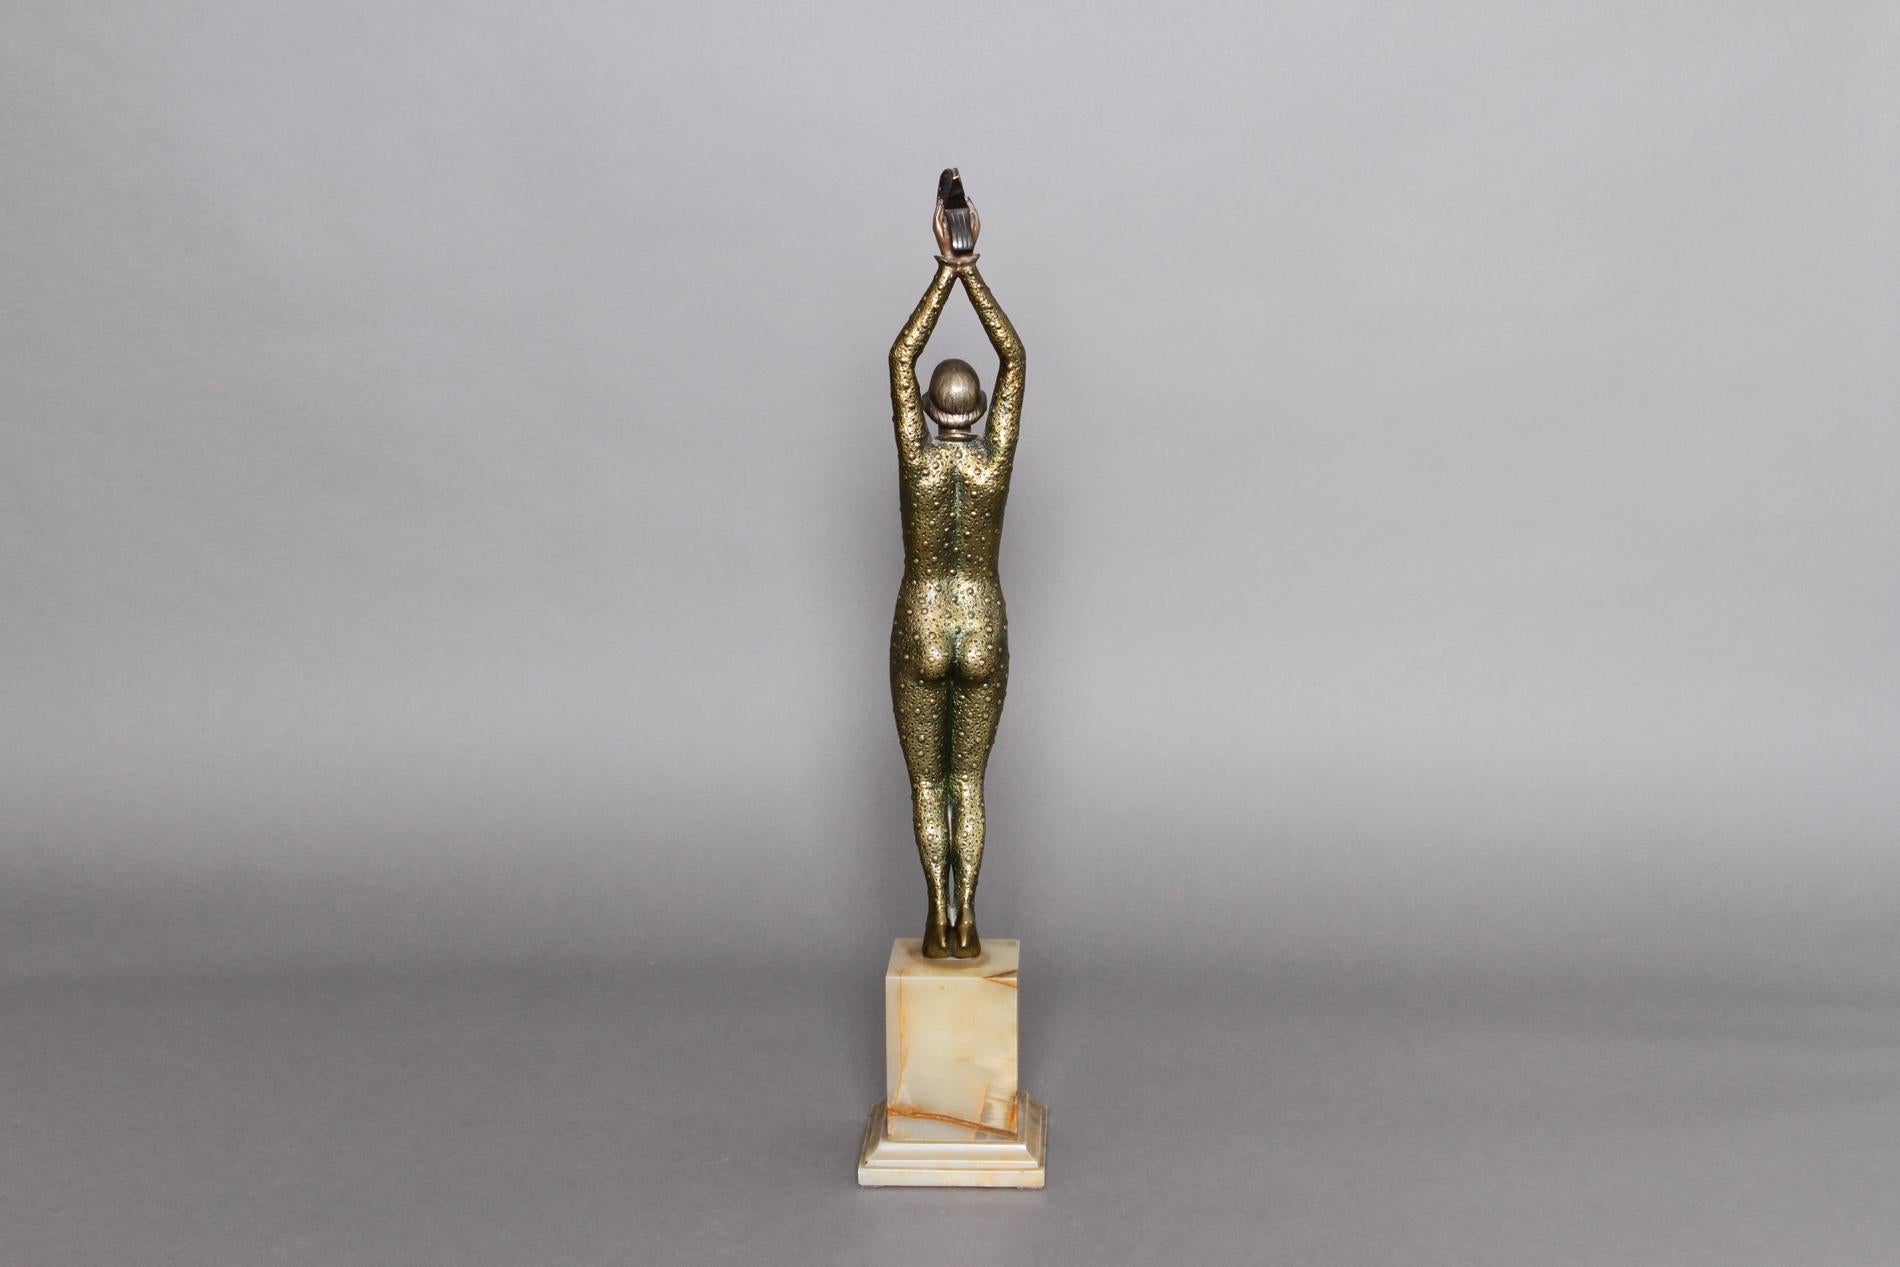 20th Century French Art Deco sculpture by Raoul Lamourdedieu 1930 For Sale